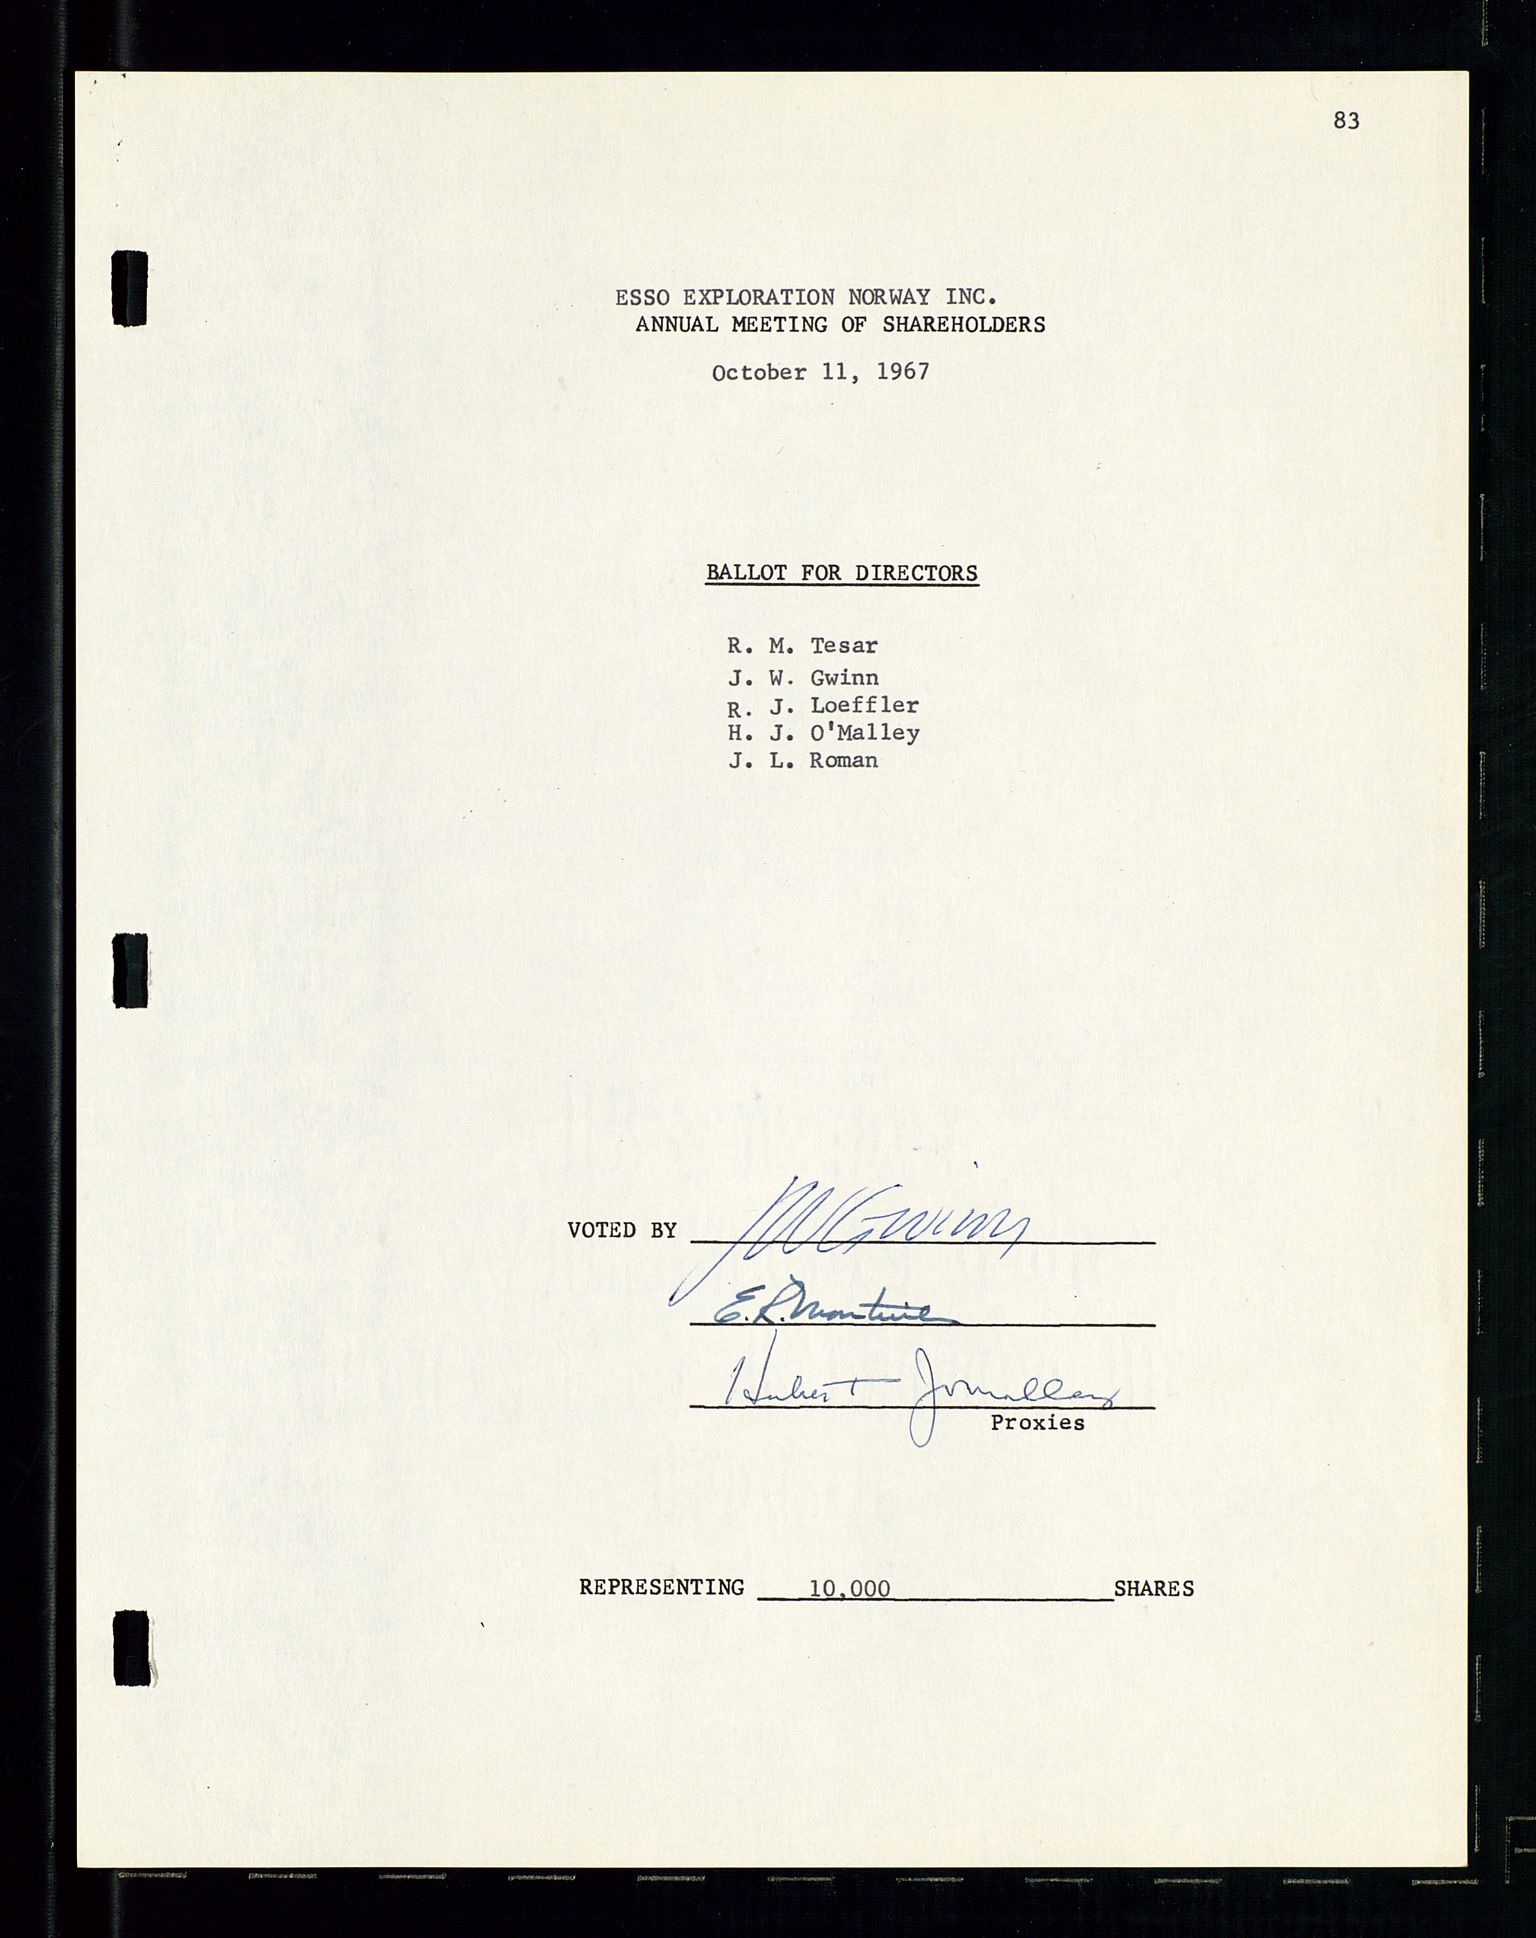 Pa 1512 - Esso Exploration and Production Norway Inc., SAST/A-101917/A/Aa/L0001/0001: Styredokumenter / Corporate records, By-Laws, Board meeting minutes, Incorporations, 1965-1975, p. 83